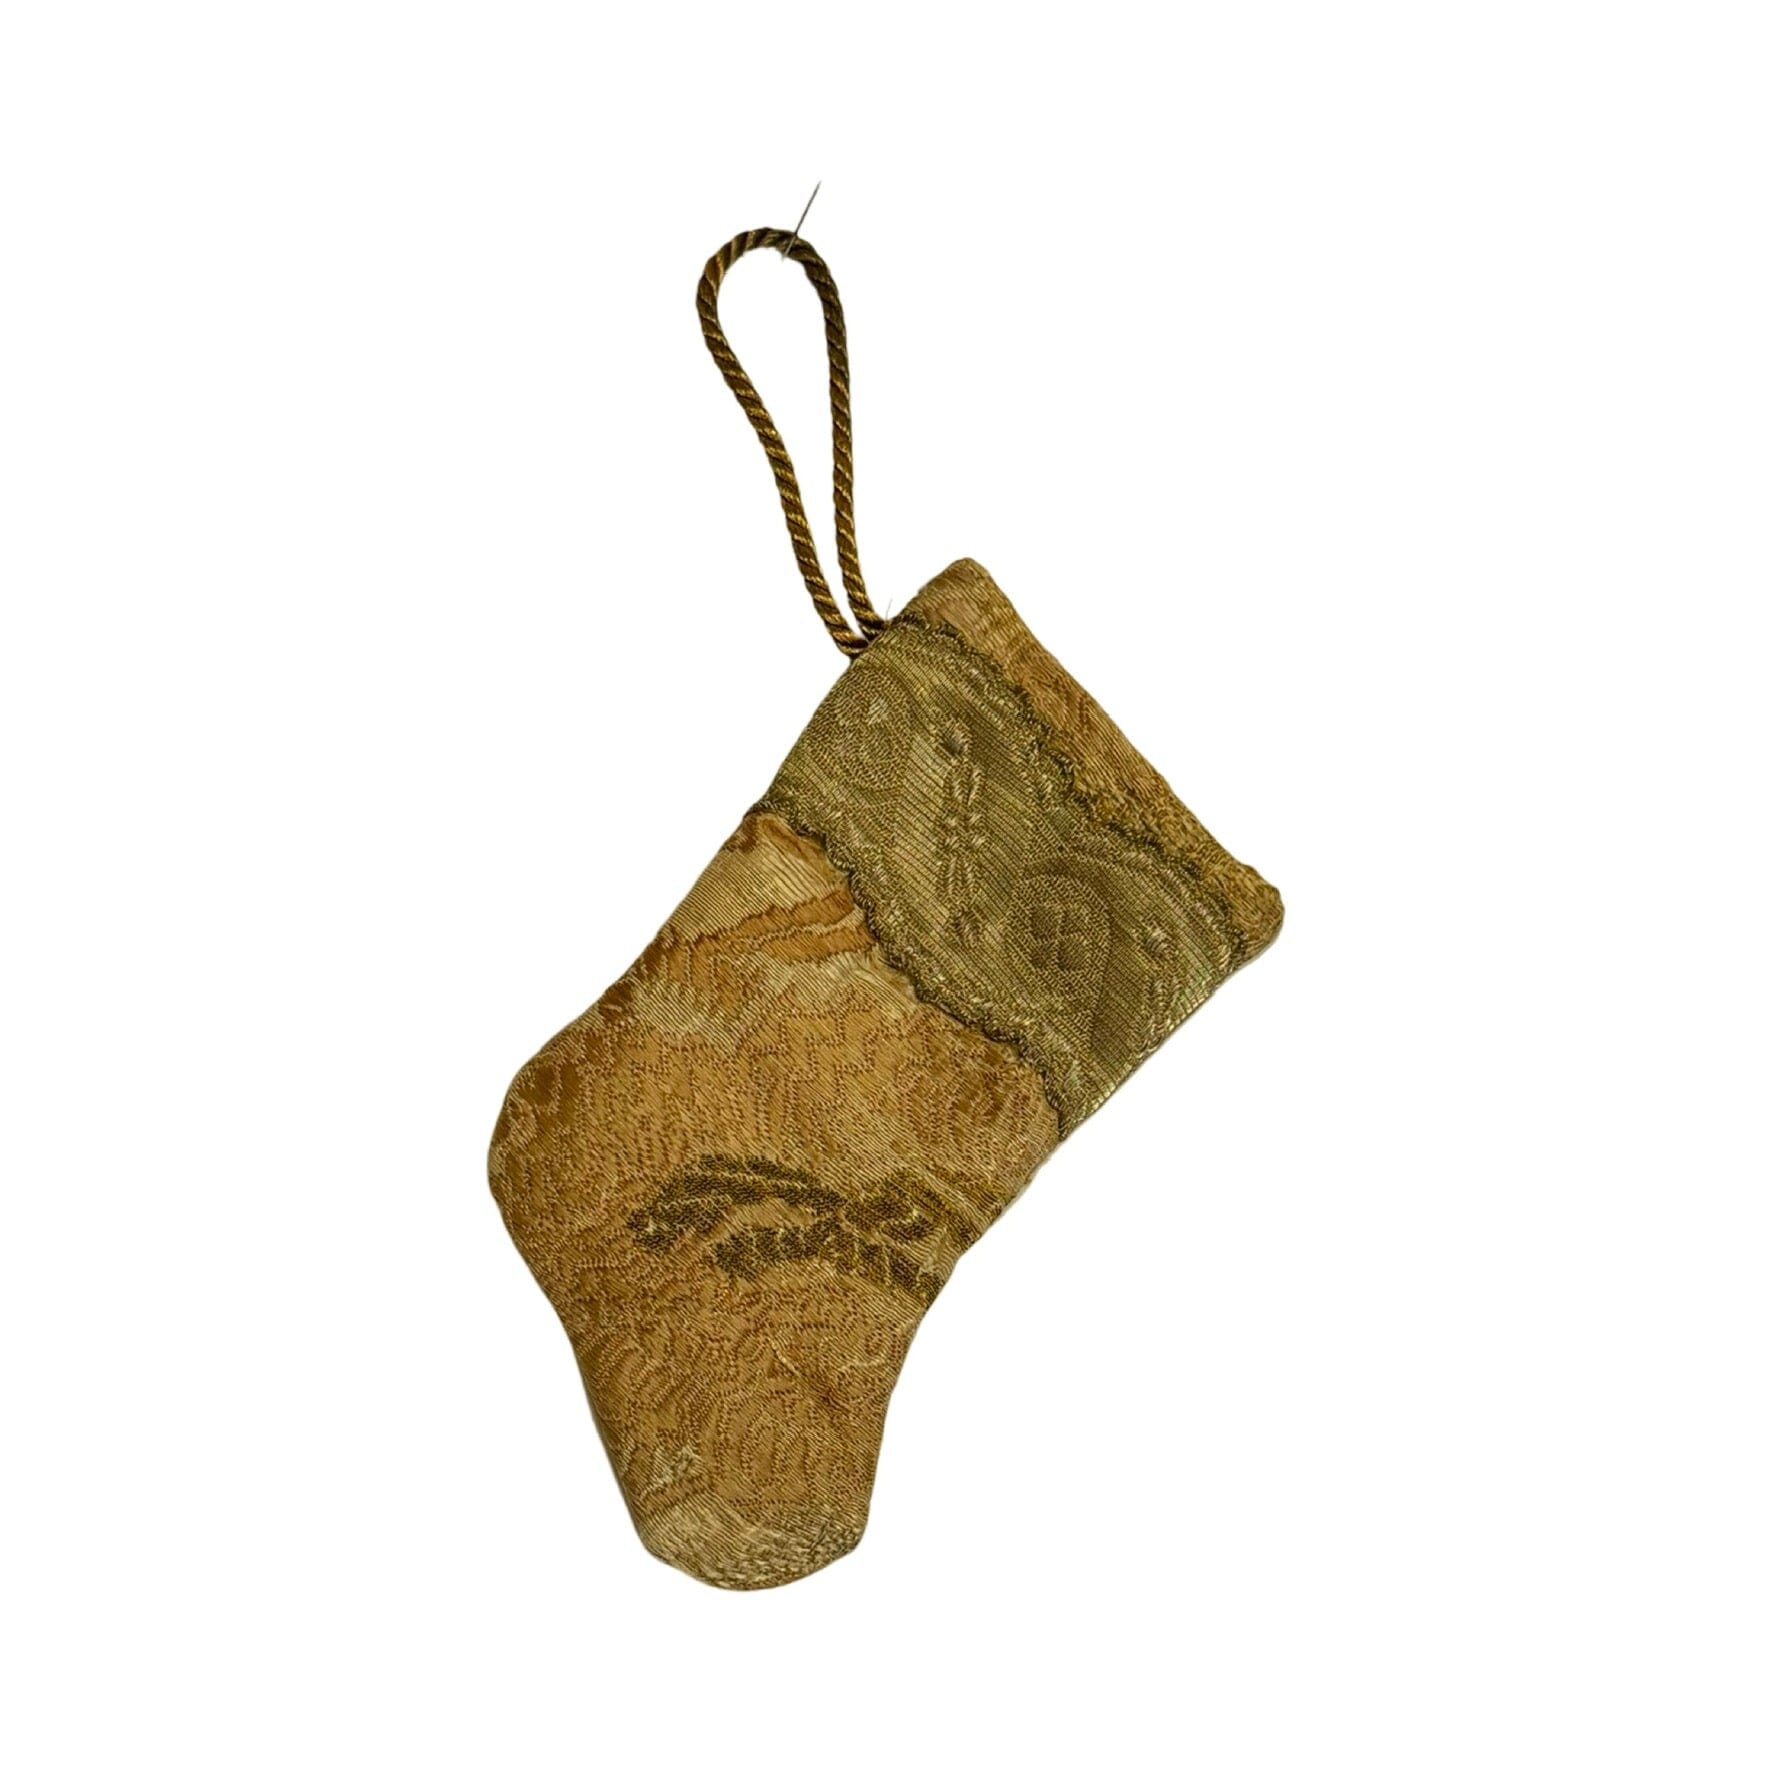 Handmade Mini Stocking Made From Vintage Fabric and Trims- Champagne Embroidery Ornament B. Viz Design D 